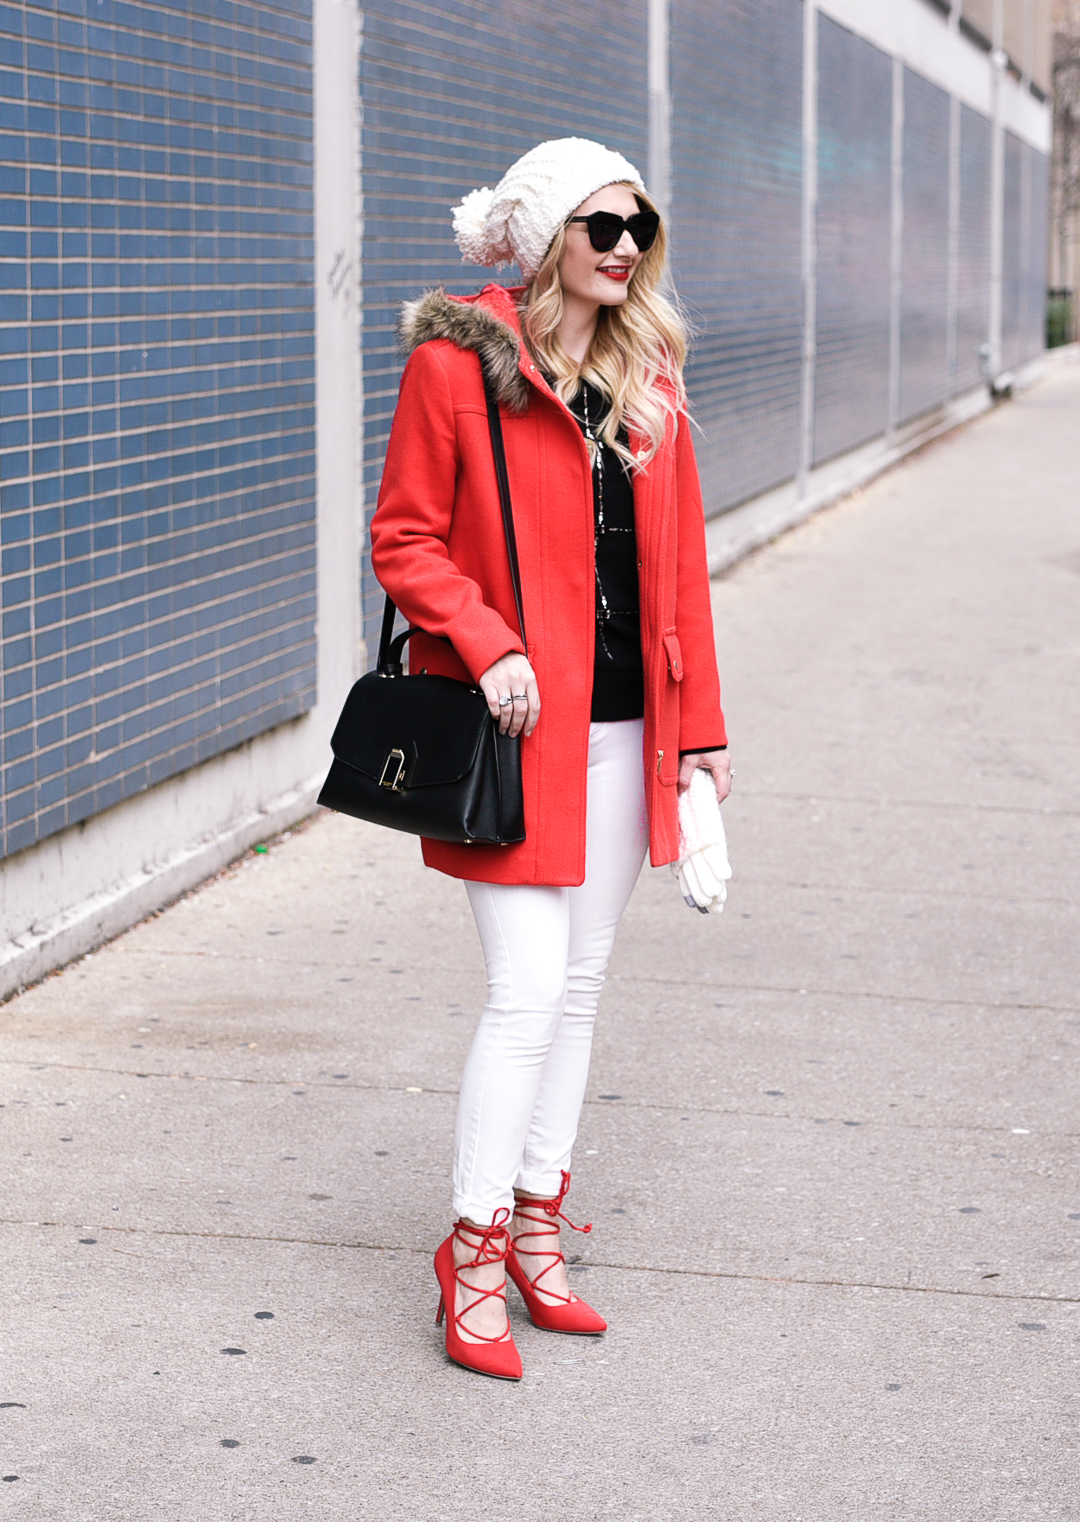 Jenna Colgrove wearing the J.Crew Vail Parka, an embellished sweater, white skinny jeans, and red suede heels. 